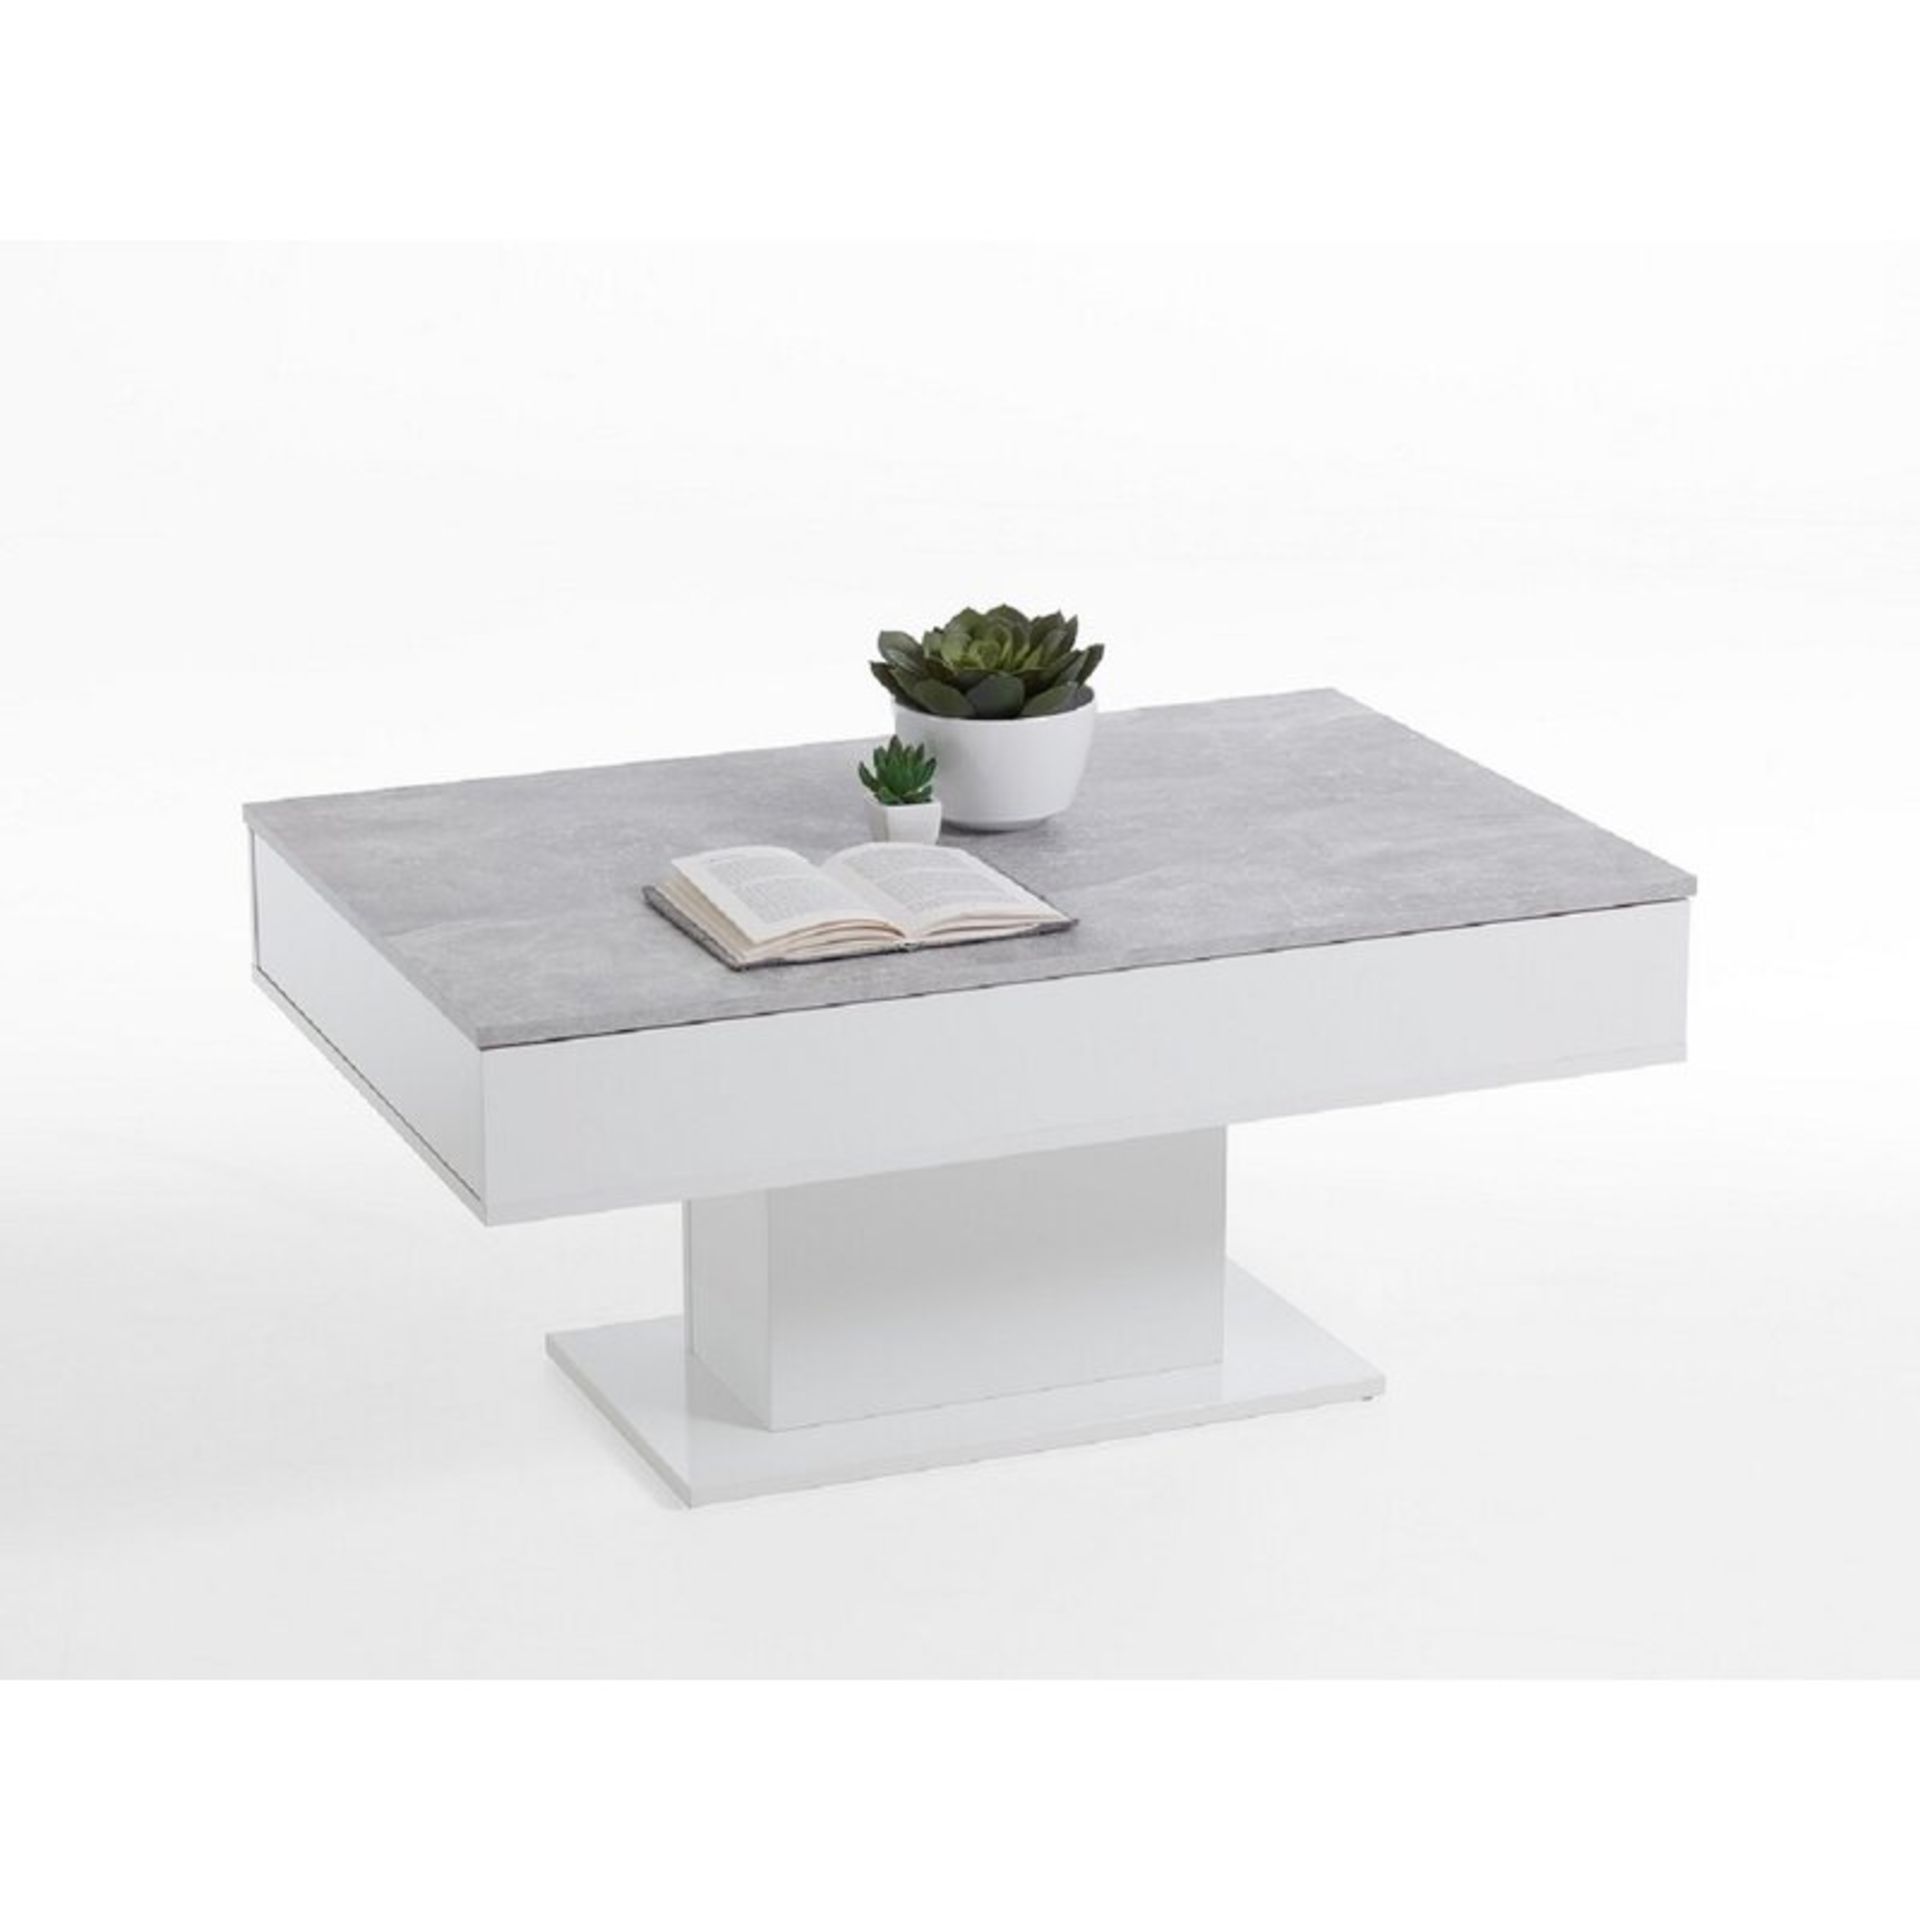 Pedestal Coffee Table with Storage - RRP £207.99. - Image 2 of 3